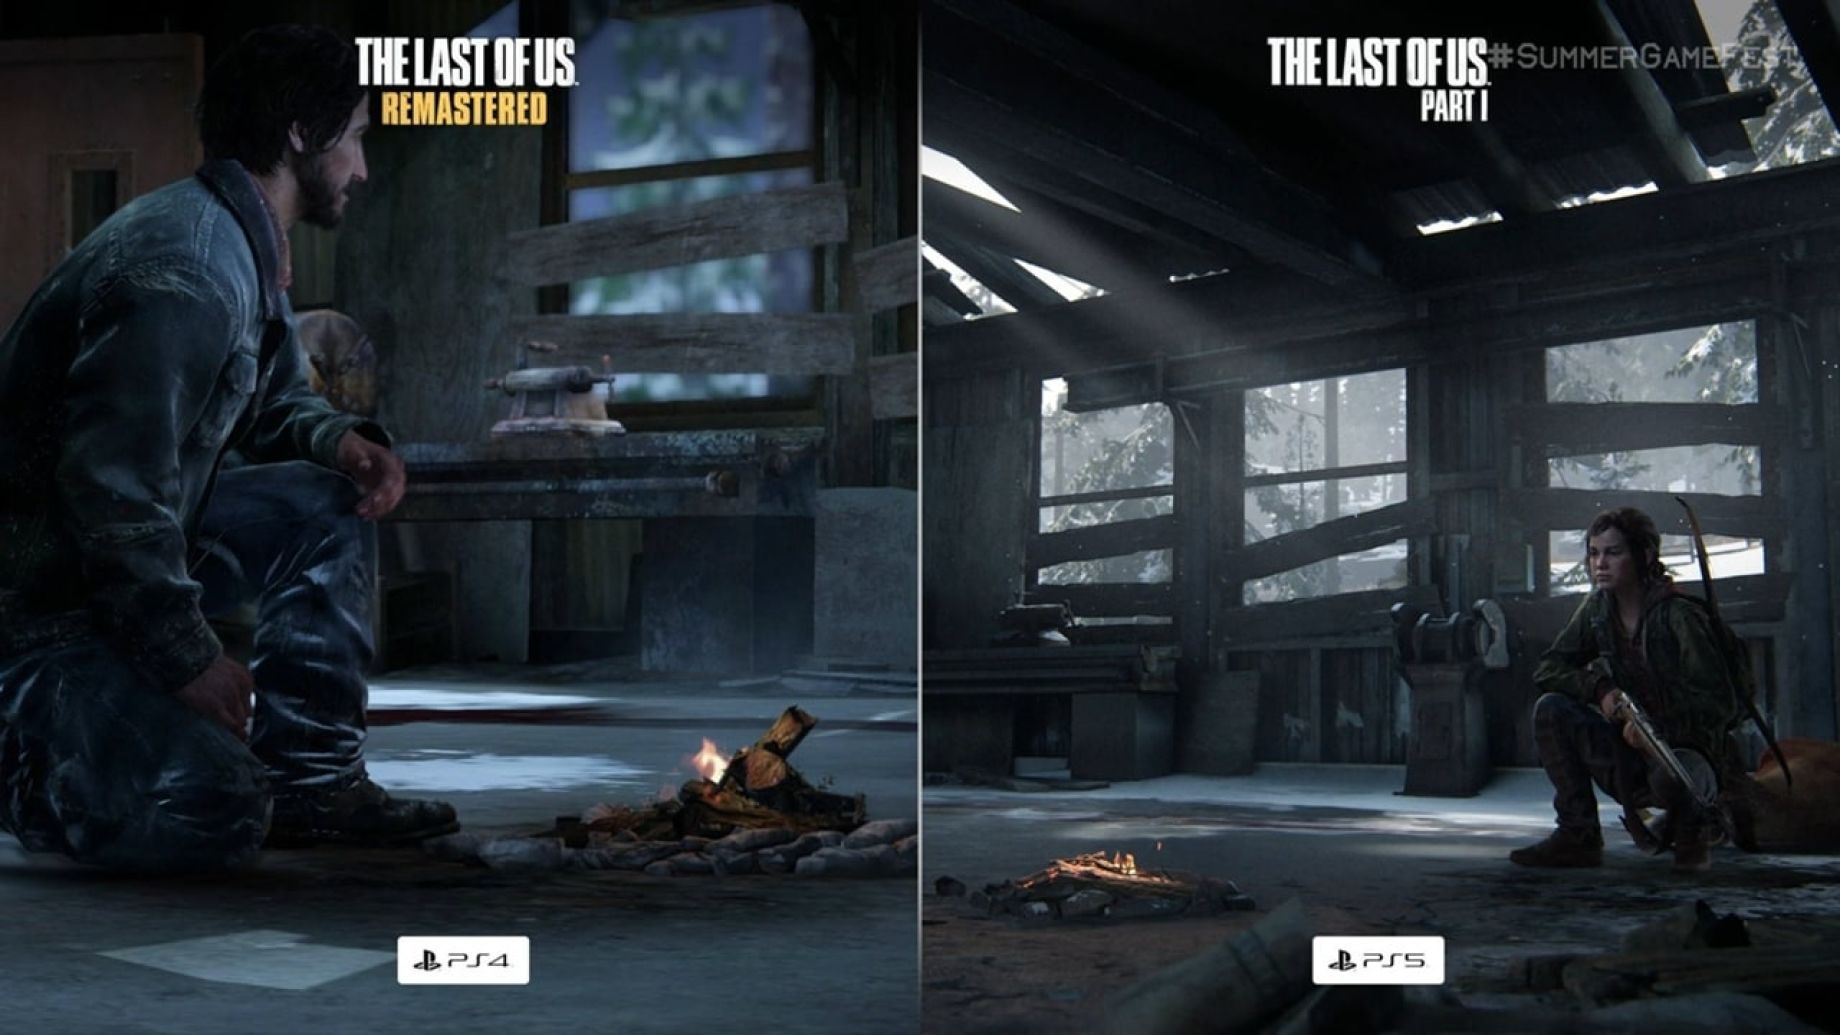 PS5 Remake comparison with the Remastered version. : r/thelastofus